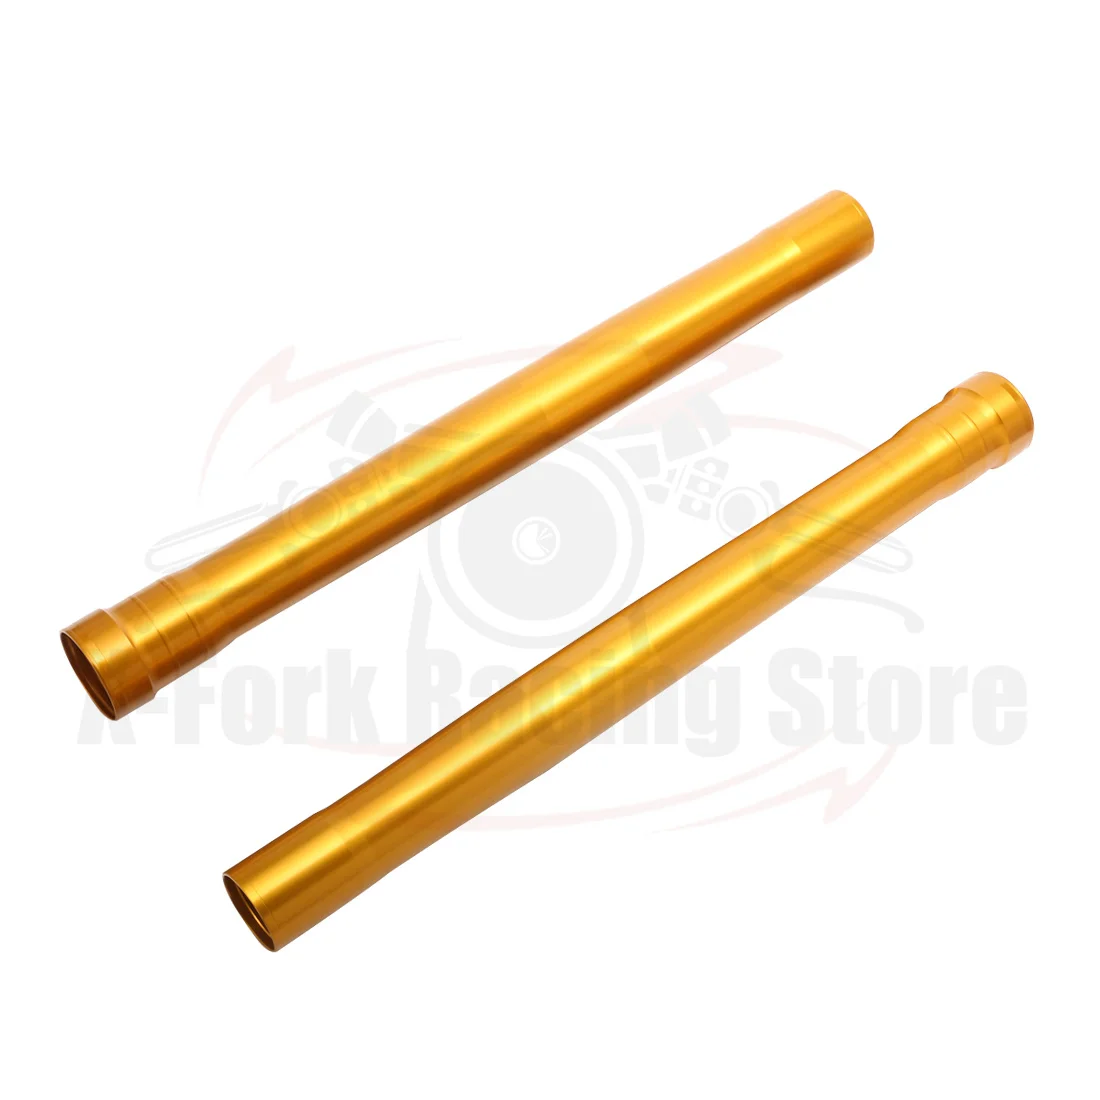 Front Fork Outer Tubes Pipes For BMW F800GS 2006-2012 2007 2008 Shock Abosorber Pipes Bars Fork Legs Suspension Gold Pair 608mm